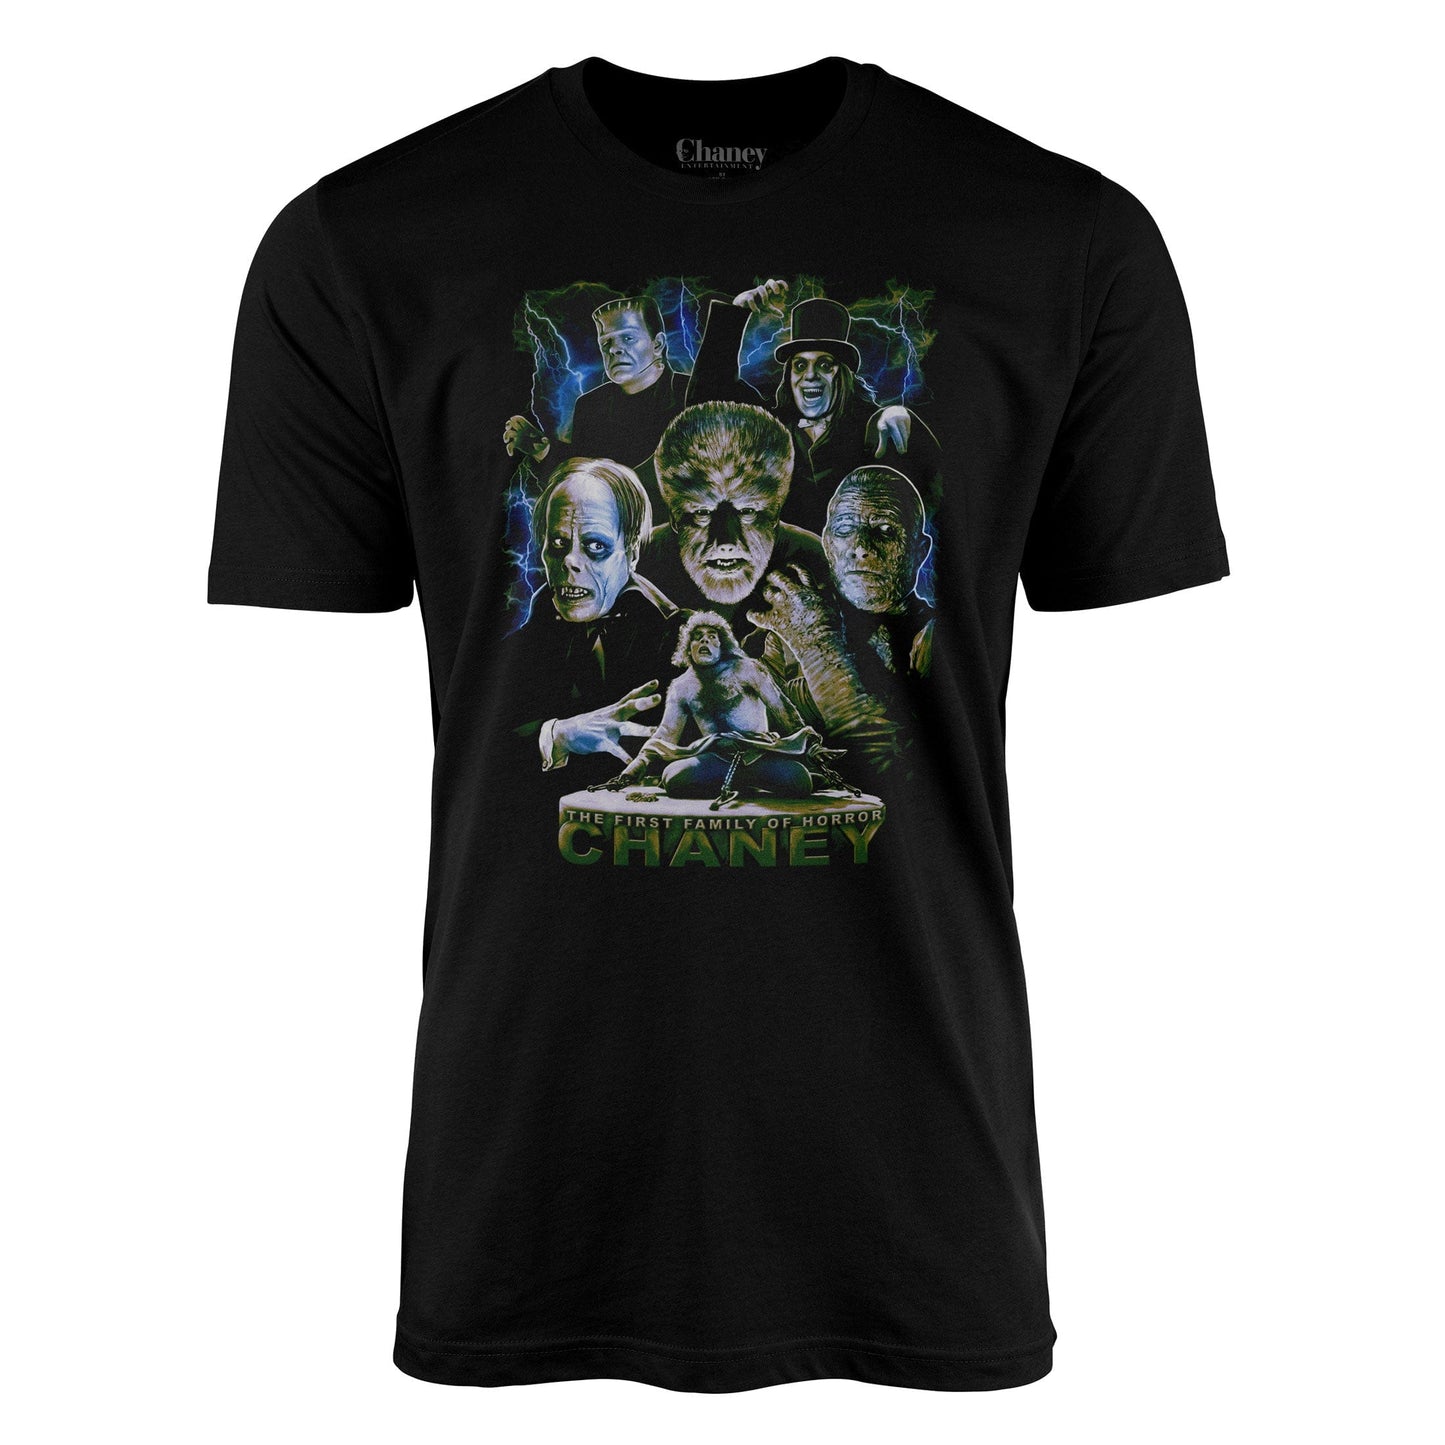 Chaney - The First Family of Horror Men's Tee